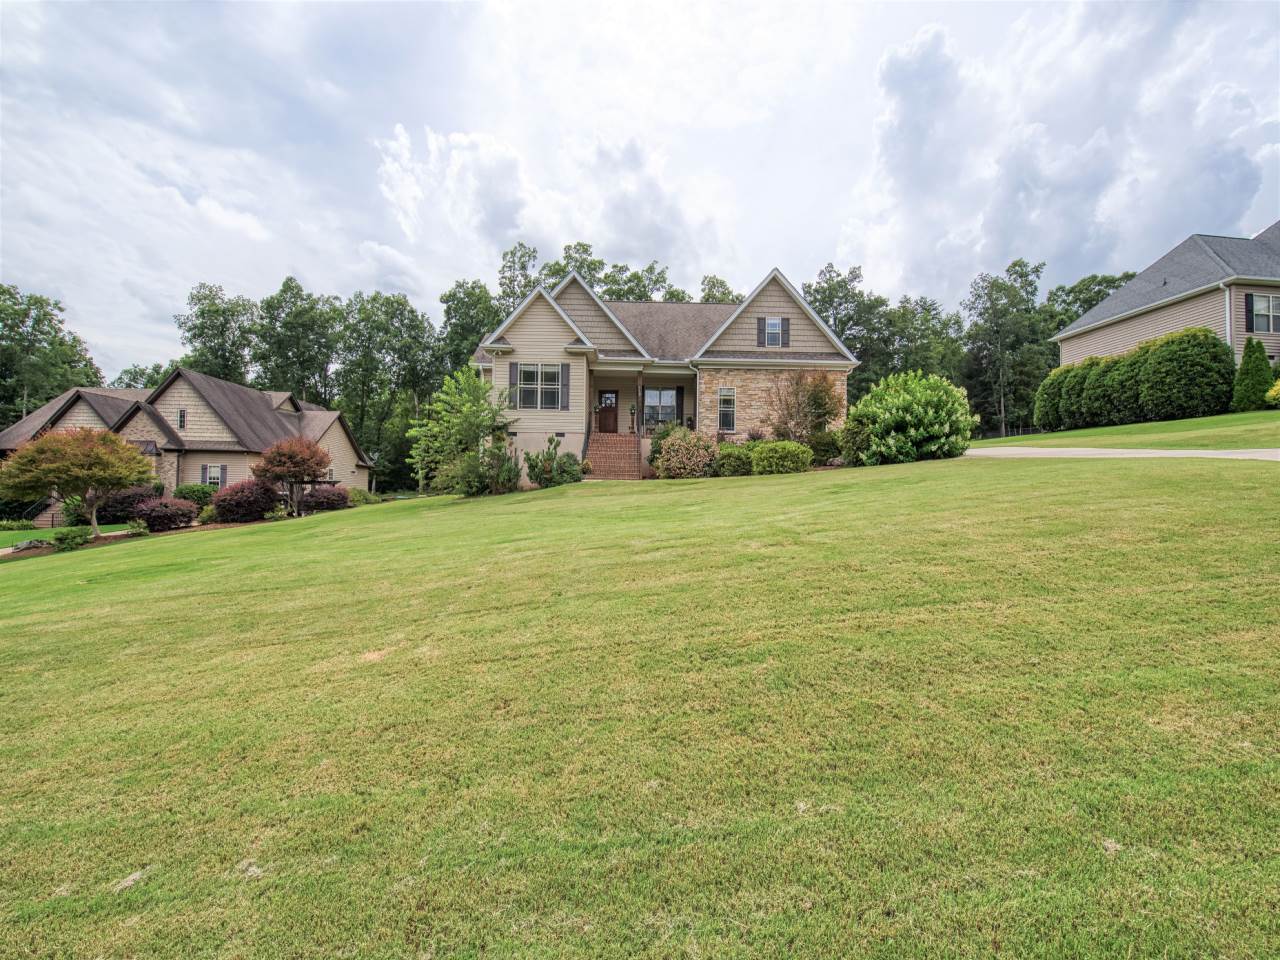 110 Grand Hollow Rd., Easley, SC 29642